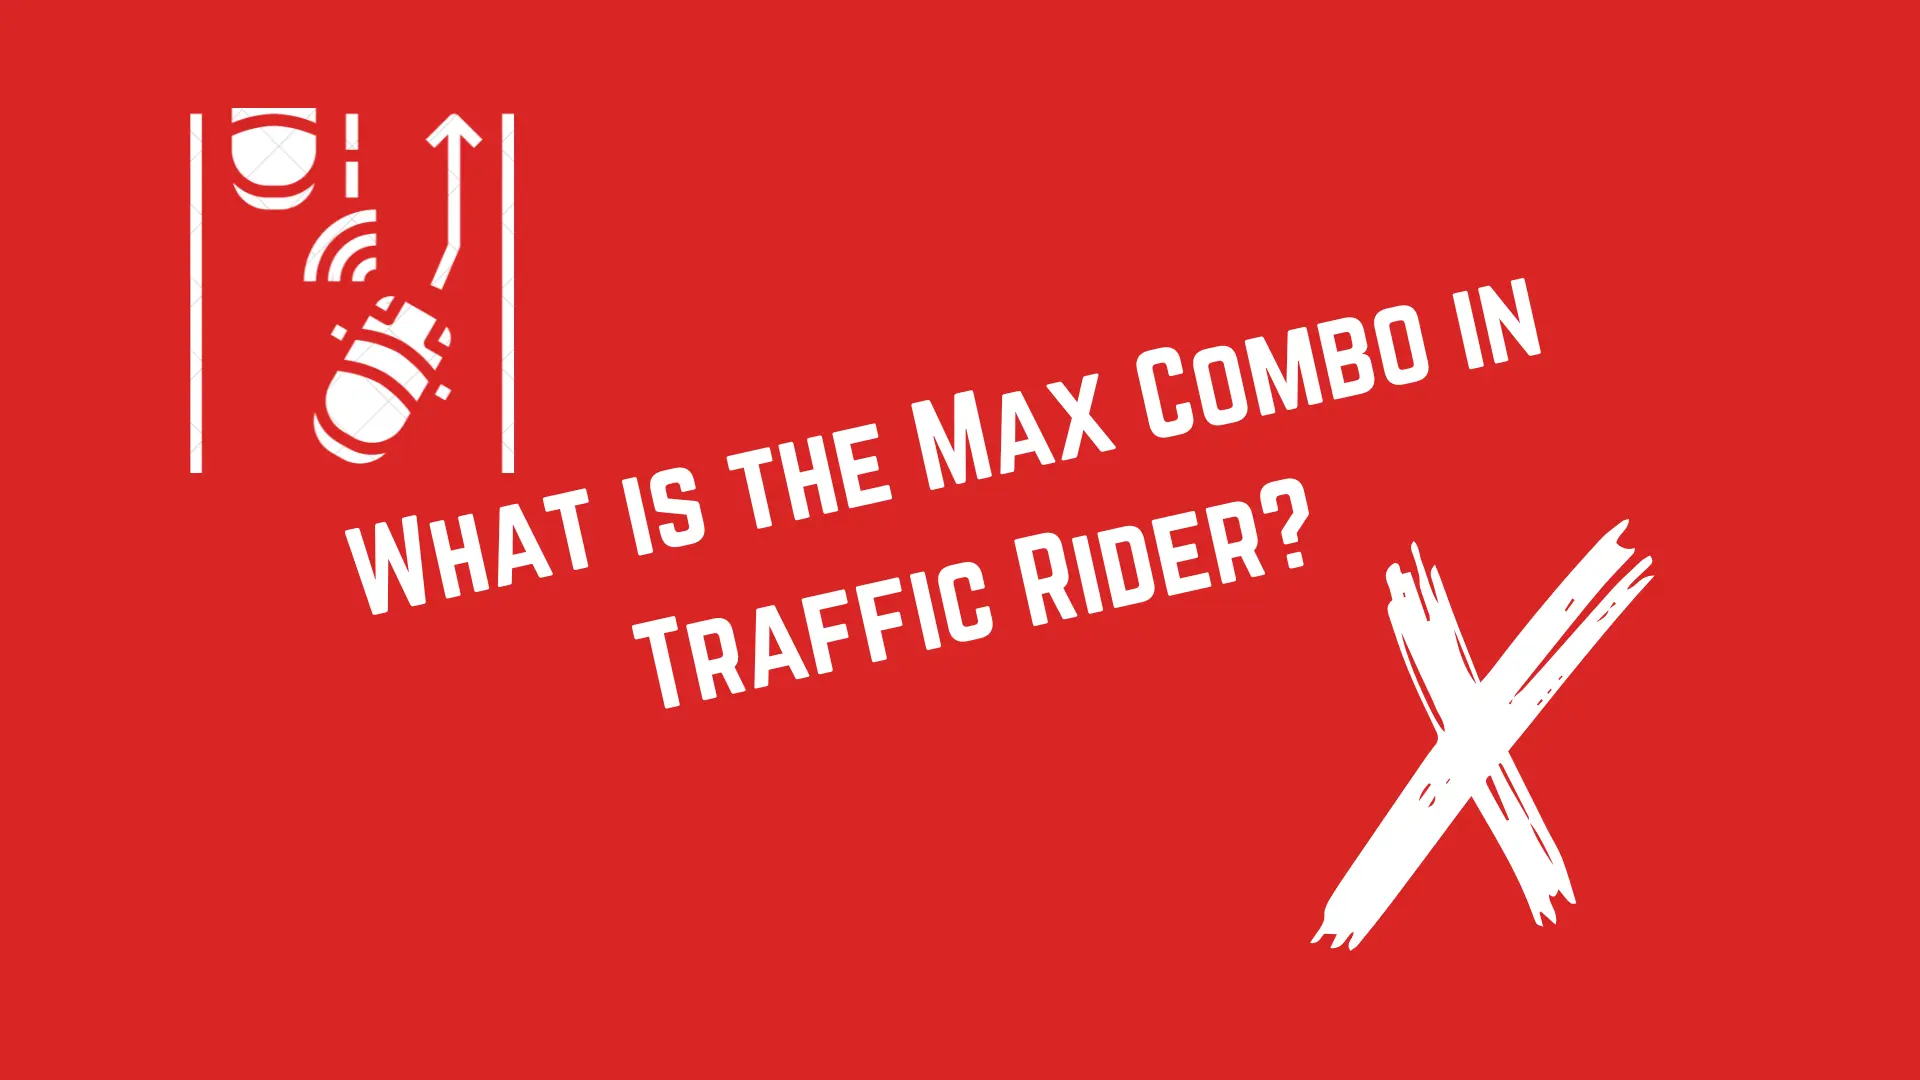 What is the max combo in traffic rider